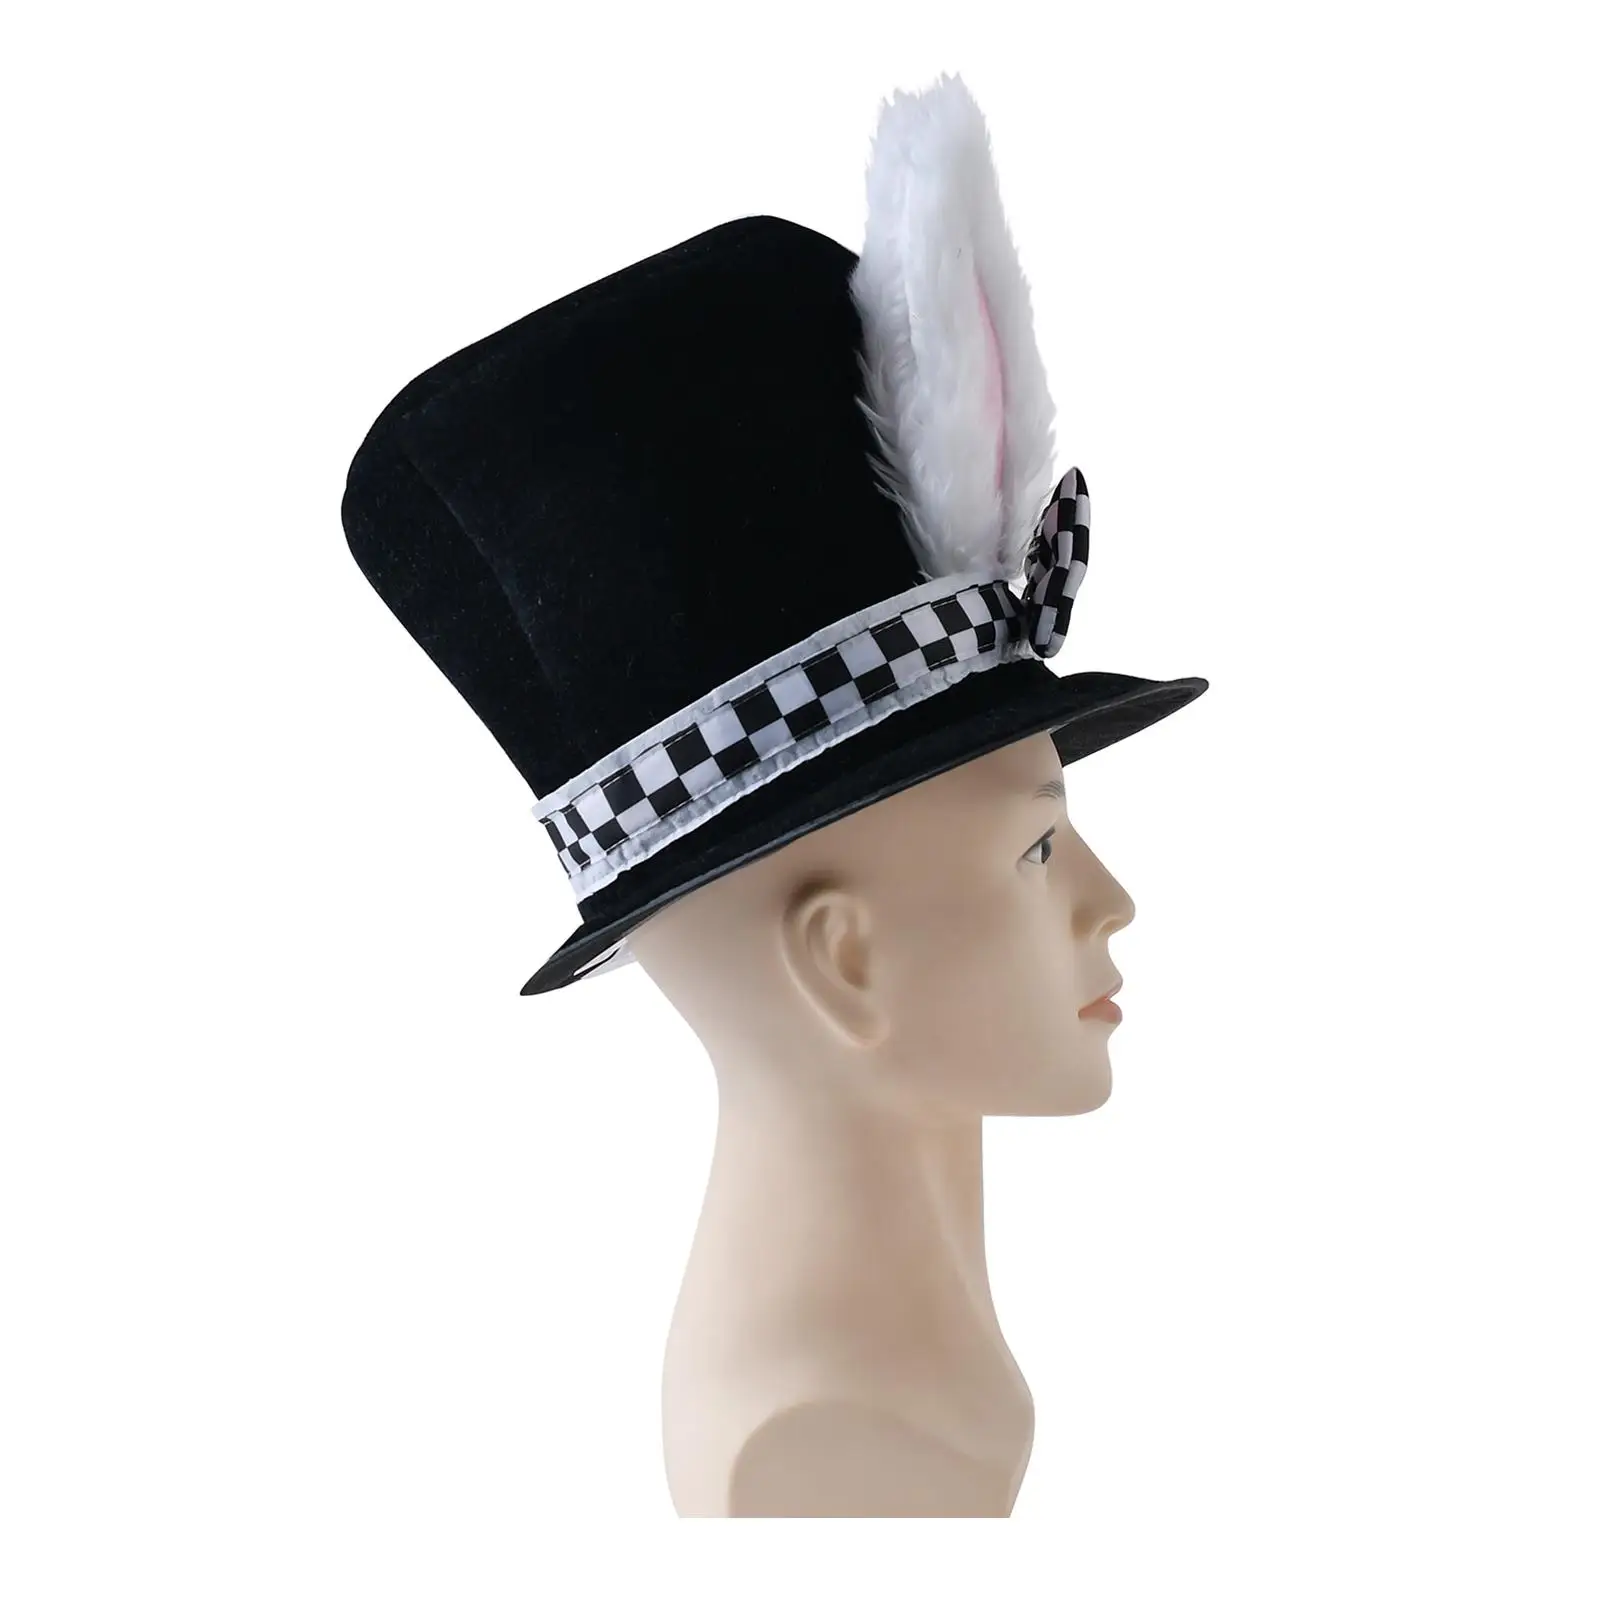 Man Velvet Bunny Ear Top Hat Cute Seasonable Hand Wash Dress up Hat Easter Bonnet Fun Novelty Holiday Hat ,One Size Fits All